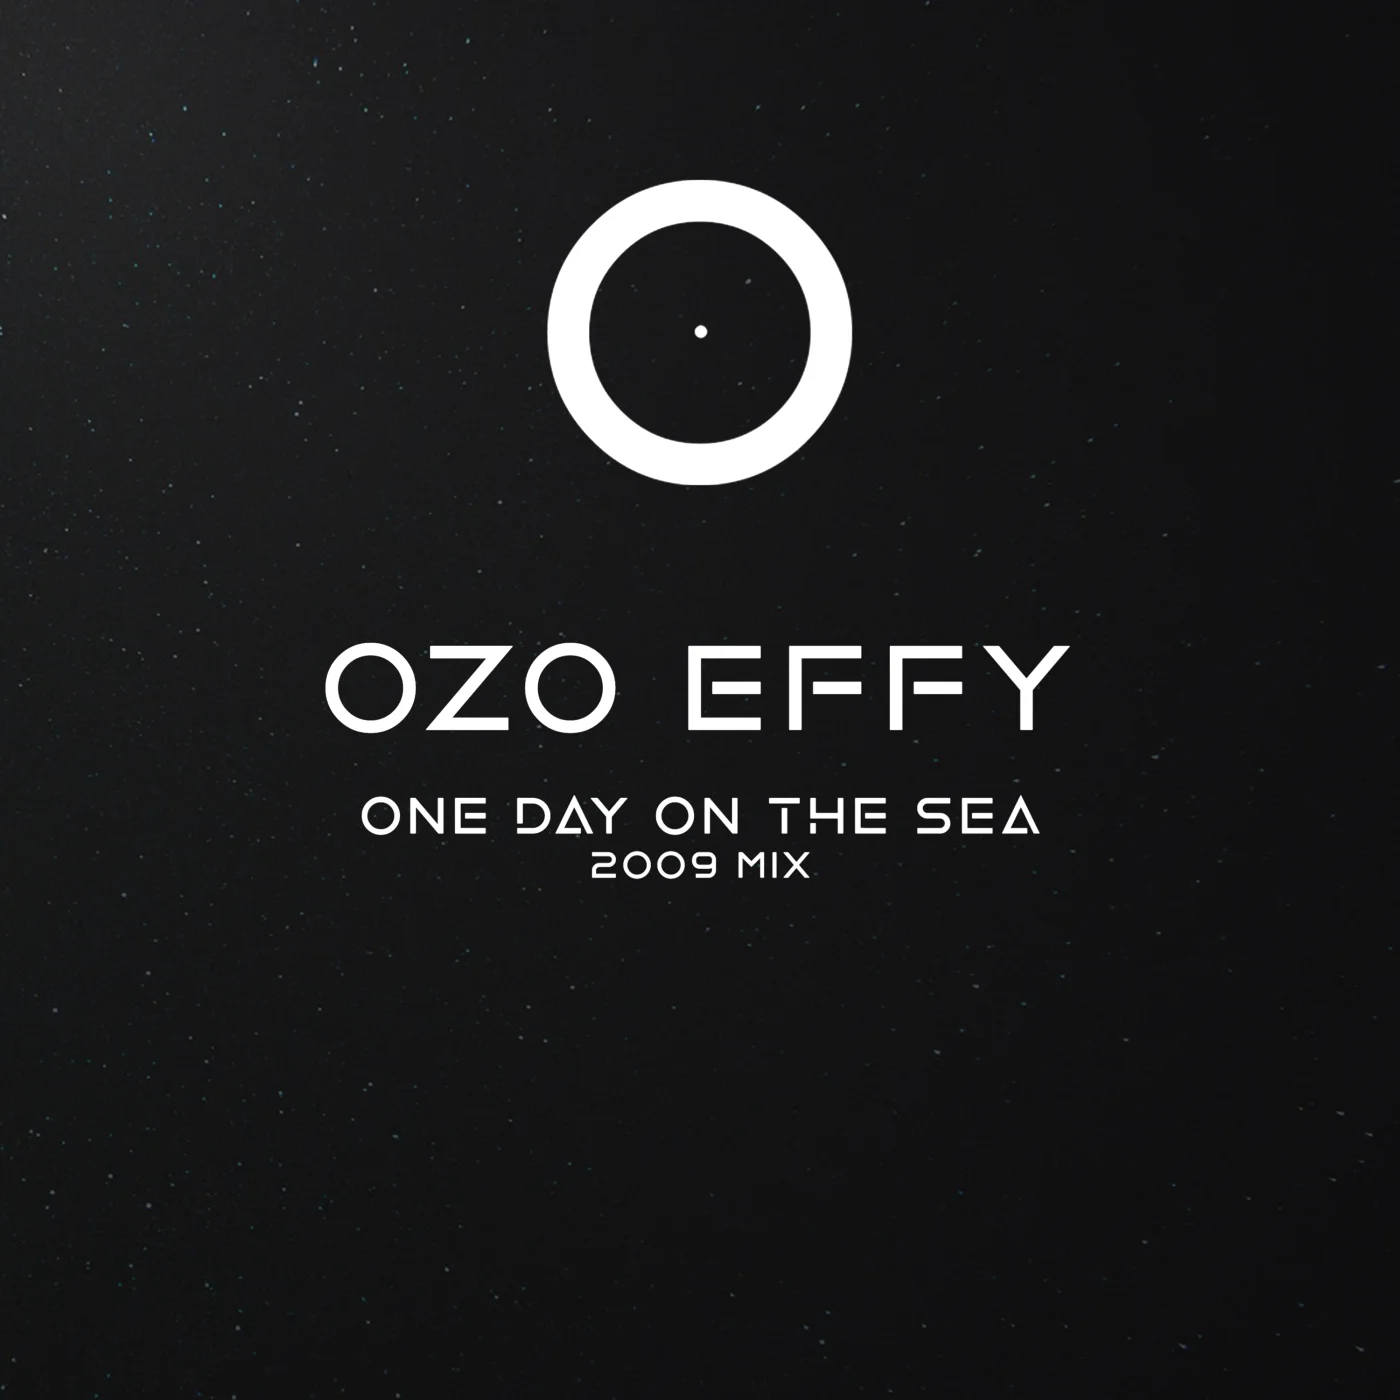 Ozo Effy - One Day On The Sea (2009 Mix)